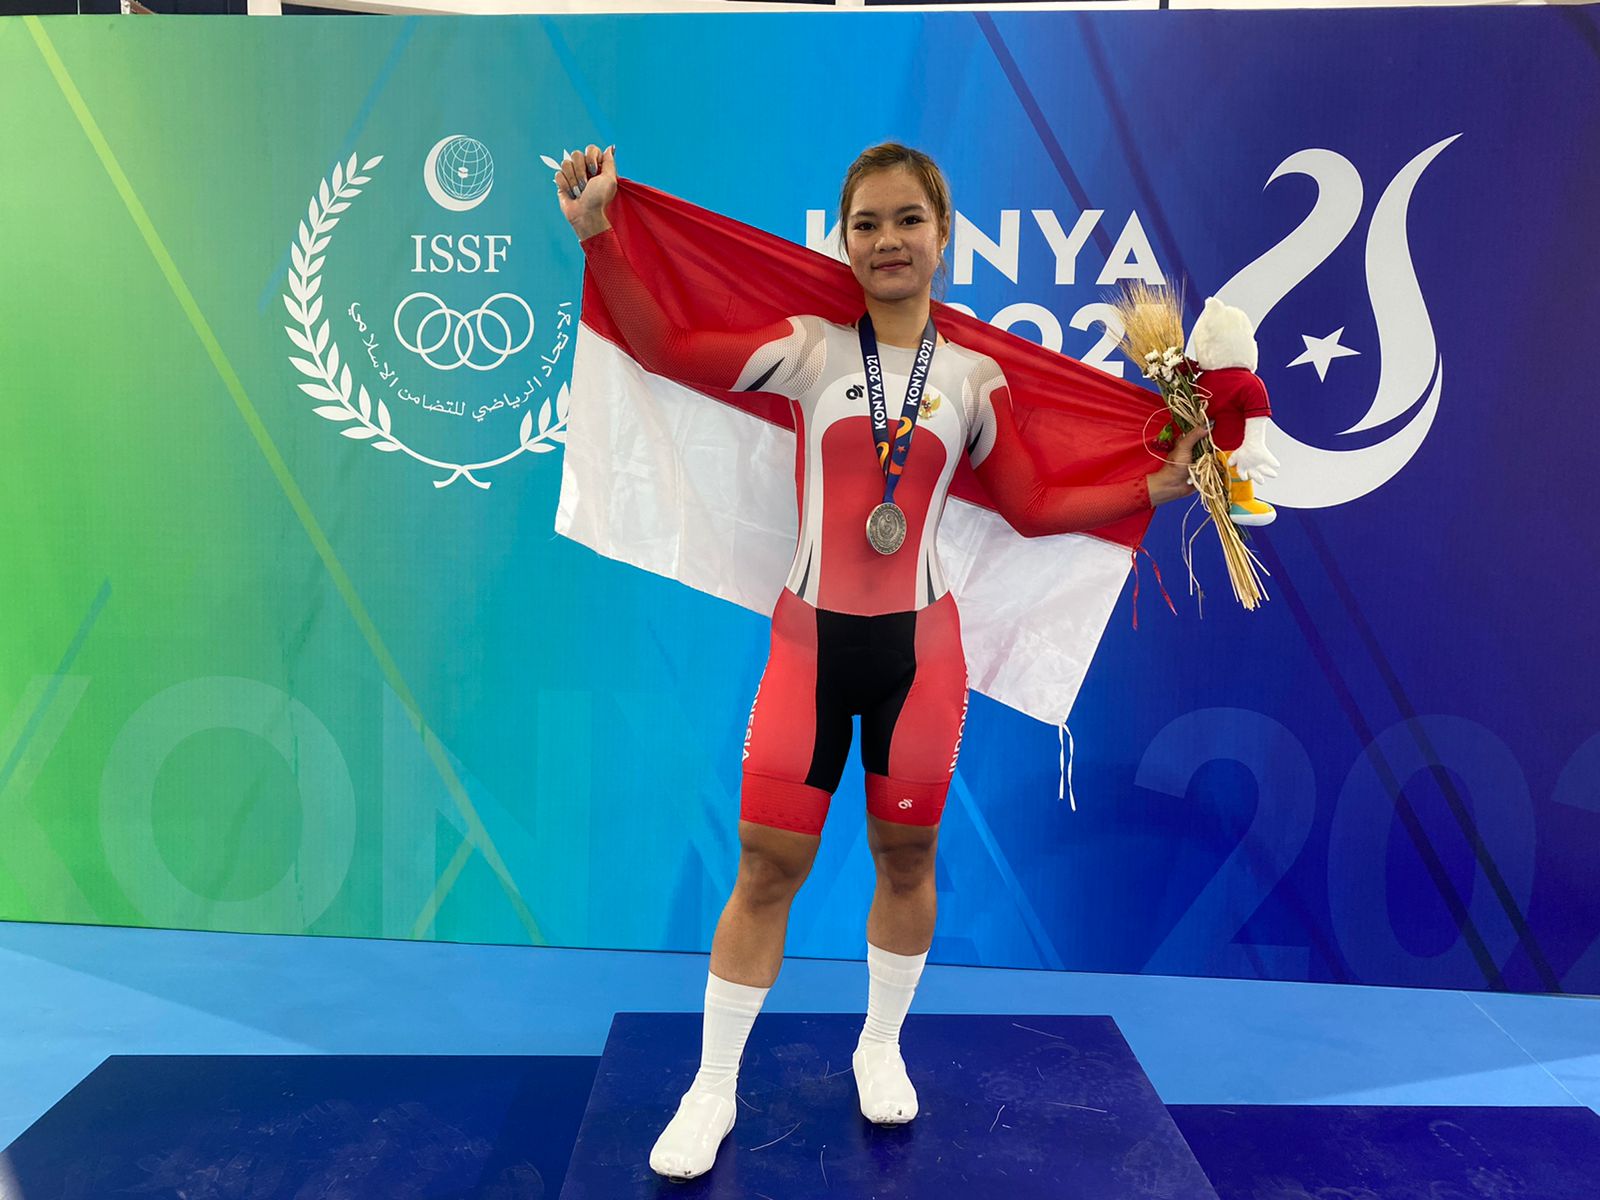 Indonesia Olympic Commitee - Tim Indonesia Bagged Two Medals To Start ISG Campaign